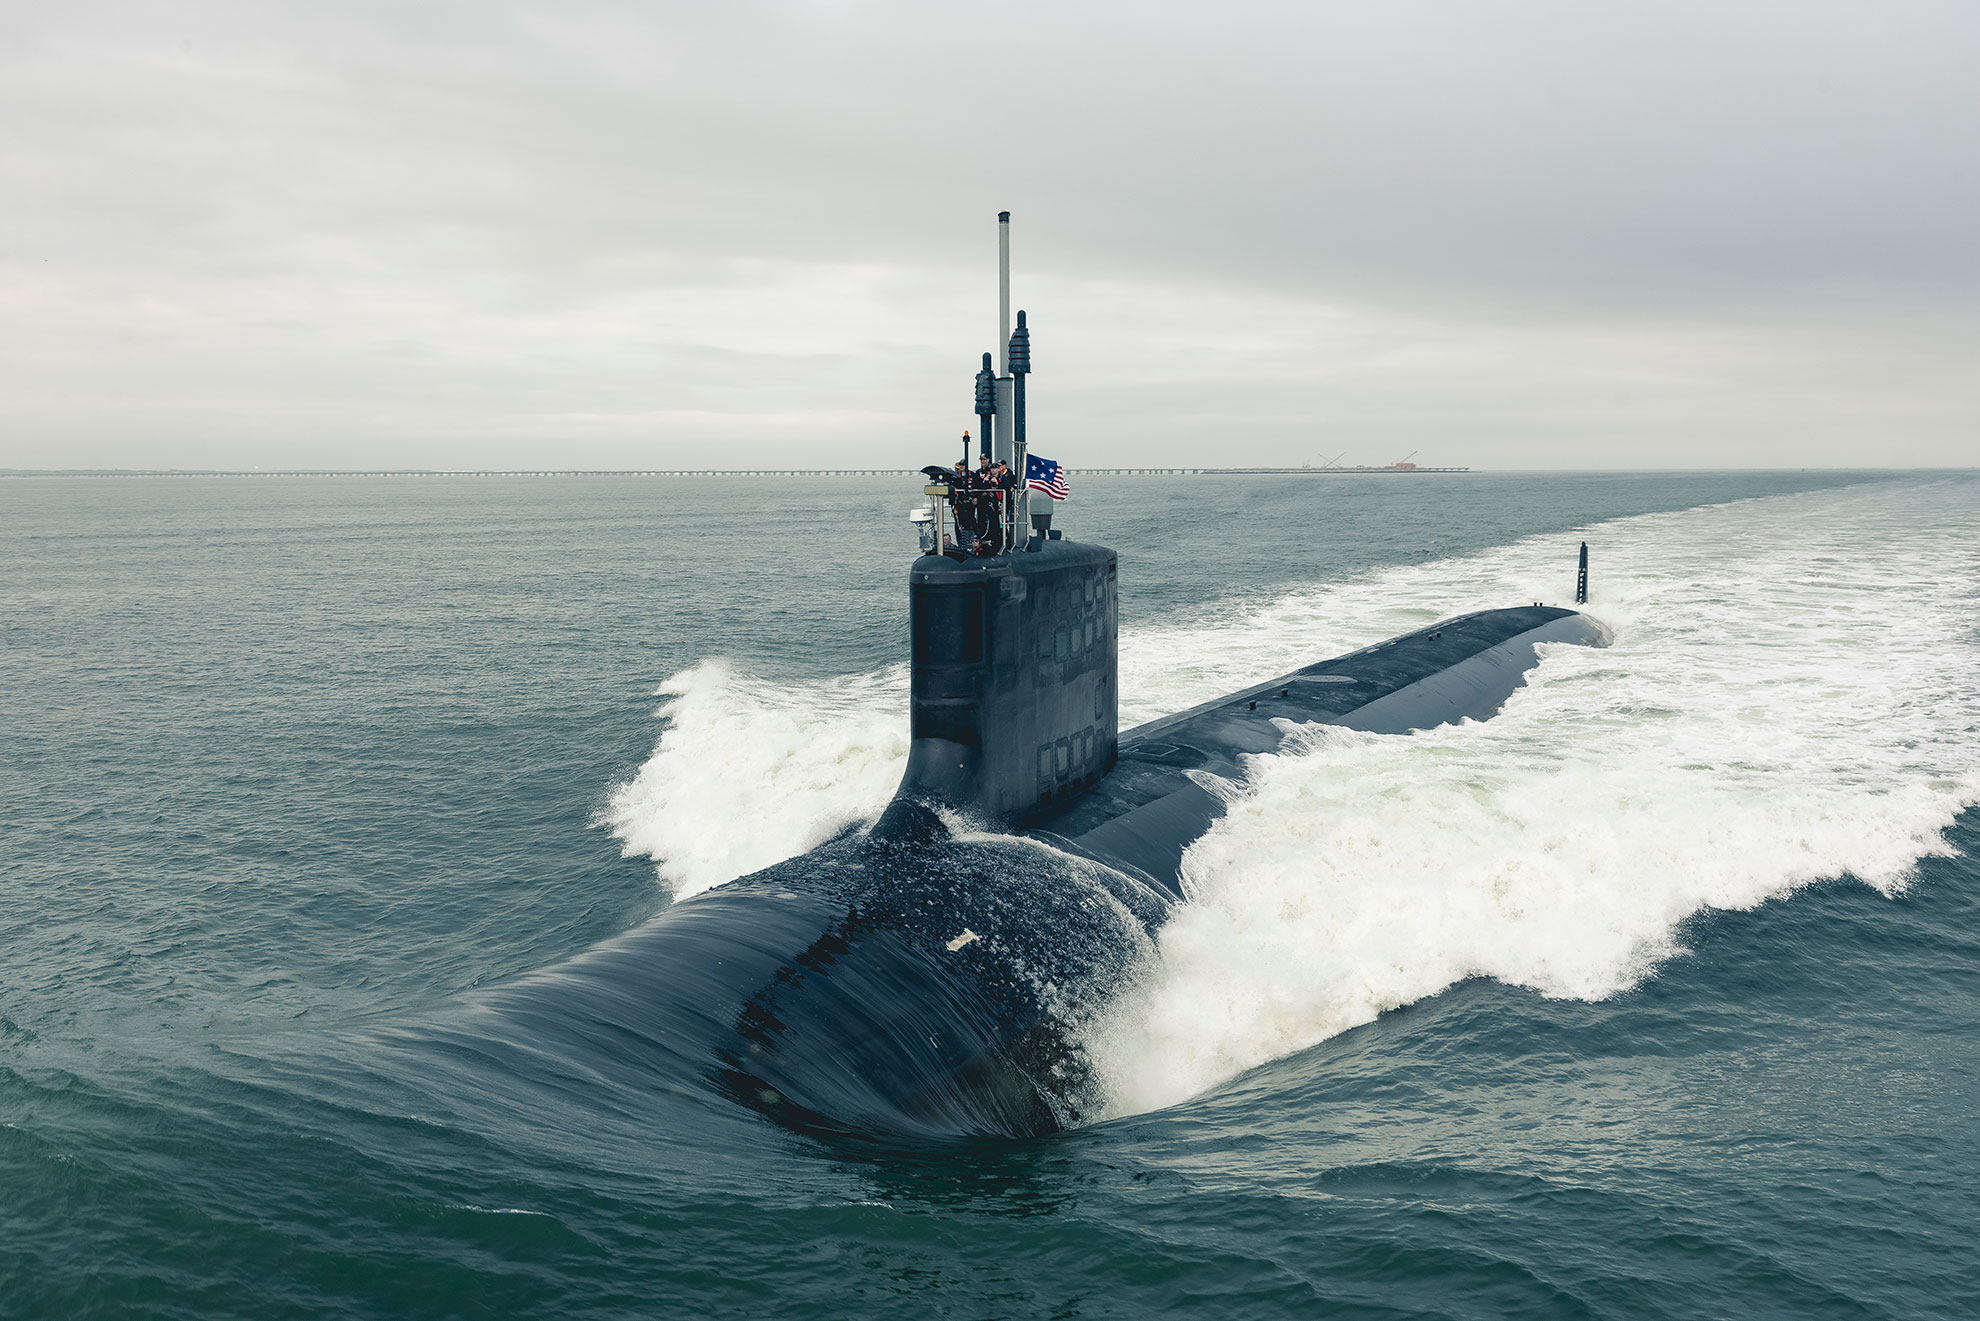 Atlantic Ocean (May 22, 2018) The Virginia-class attack submarine Pre-Commissioning Unit (PCU) Indiana (SSN 789) departs Newport News Shipbuilding to conduct Alpha sea trials in the Atlantic Ocean. Indiana will be commissioned Saturday, Sept. 29, 2018, in Port Canaveral, Fla. -- U.S. Navy photo courtesy of General Dynamics Electric Boat by Matt Hildreth. -